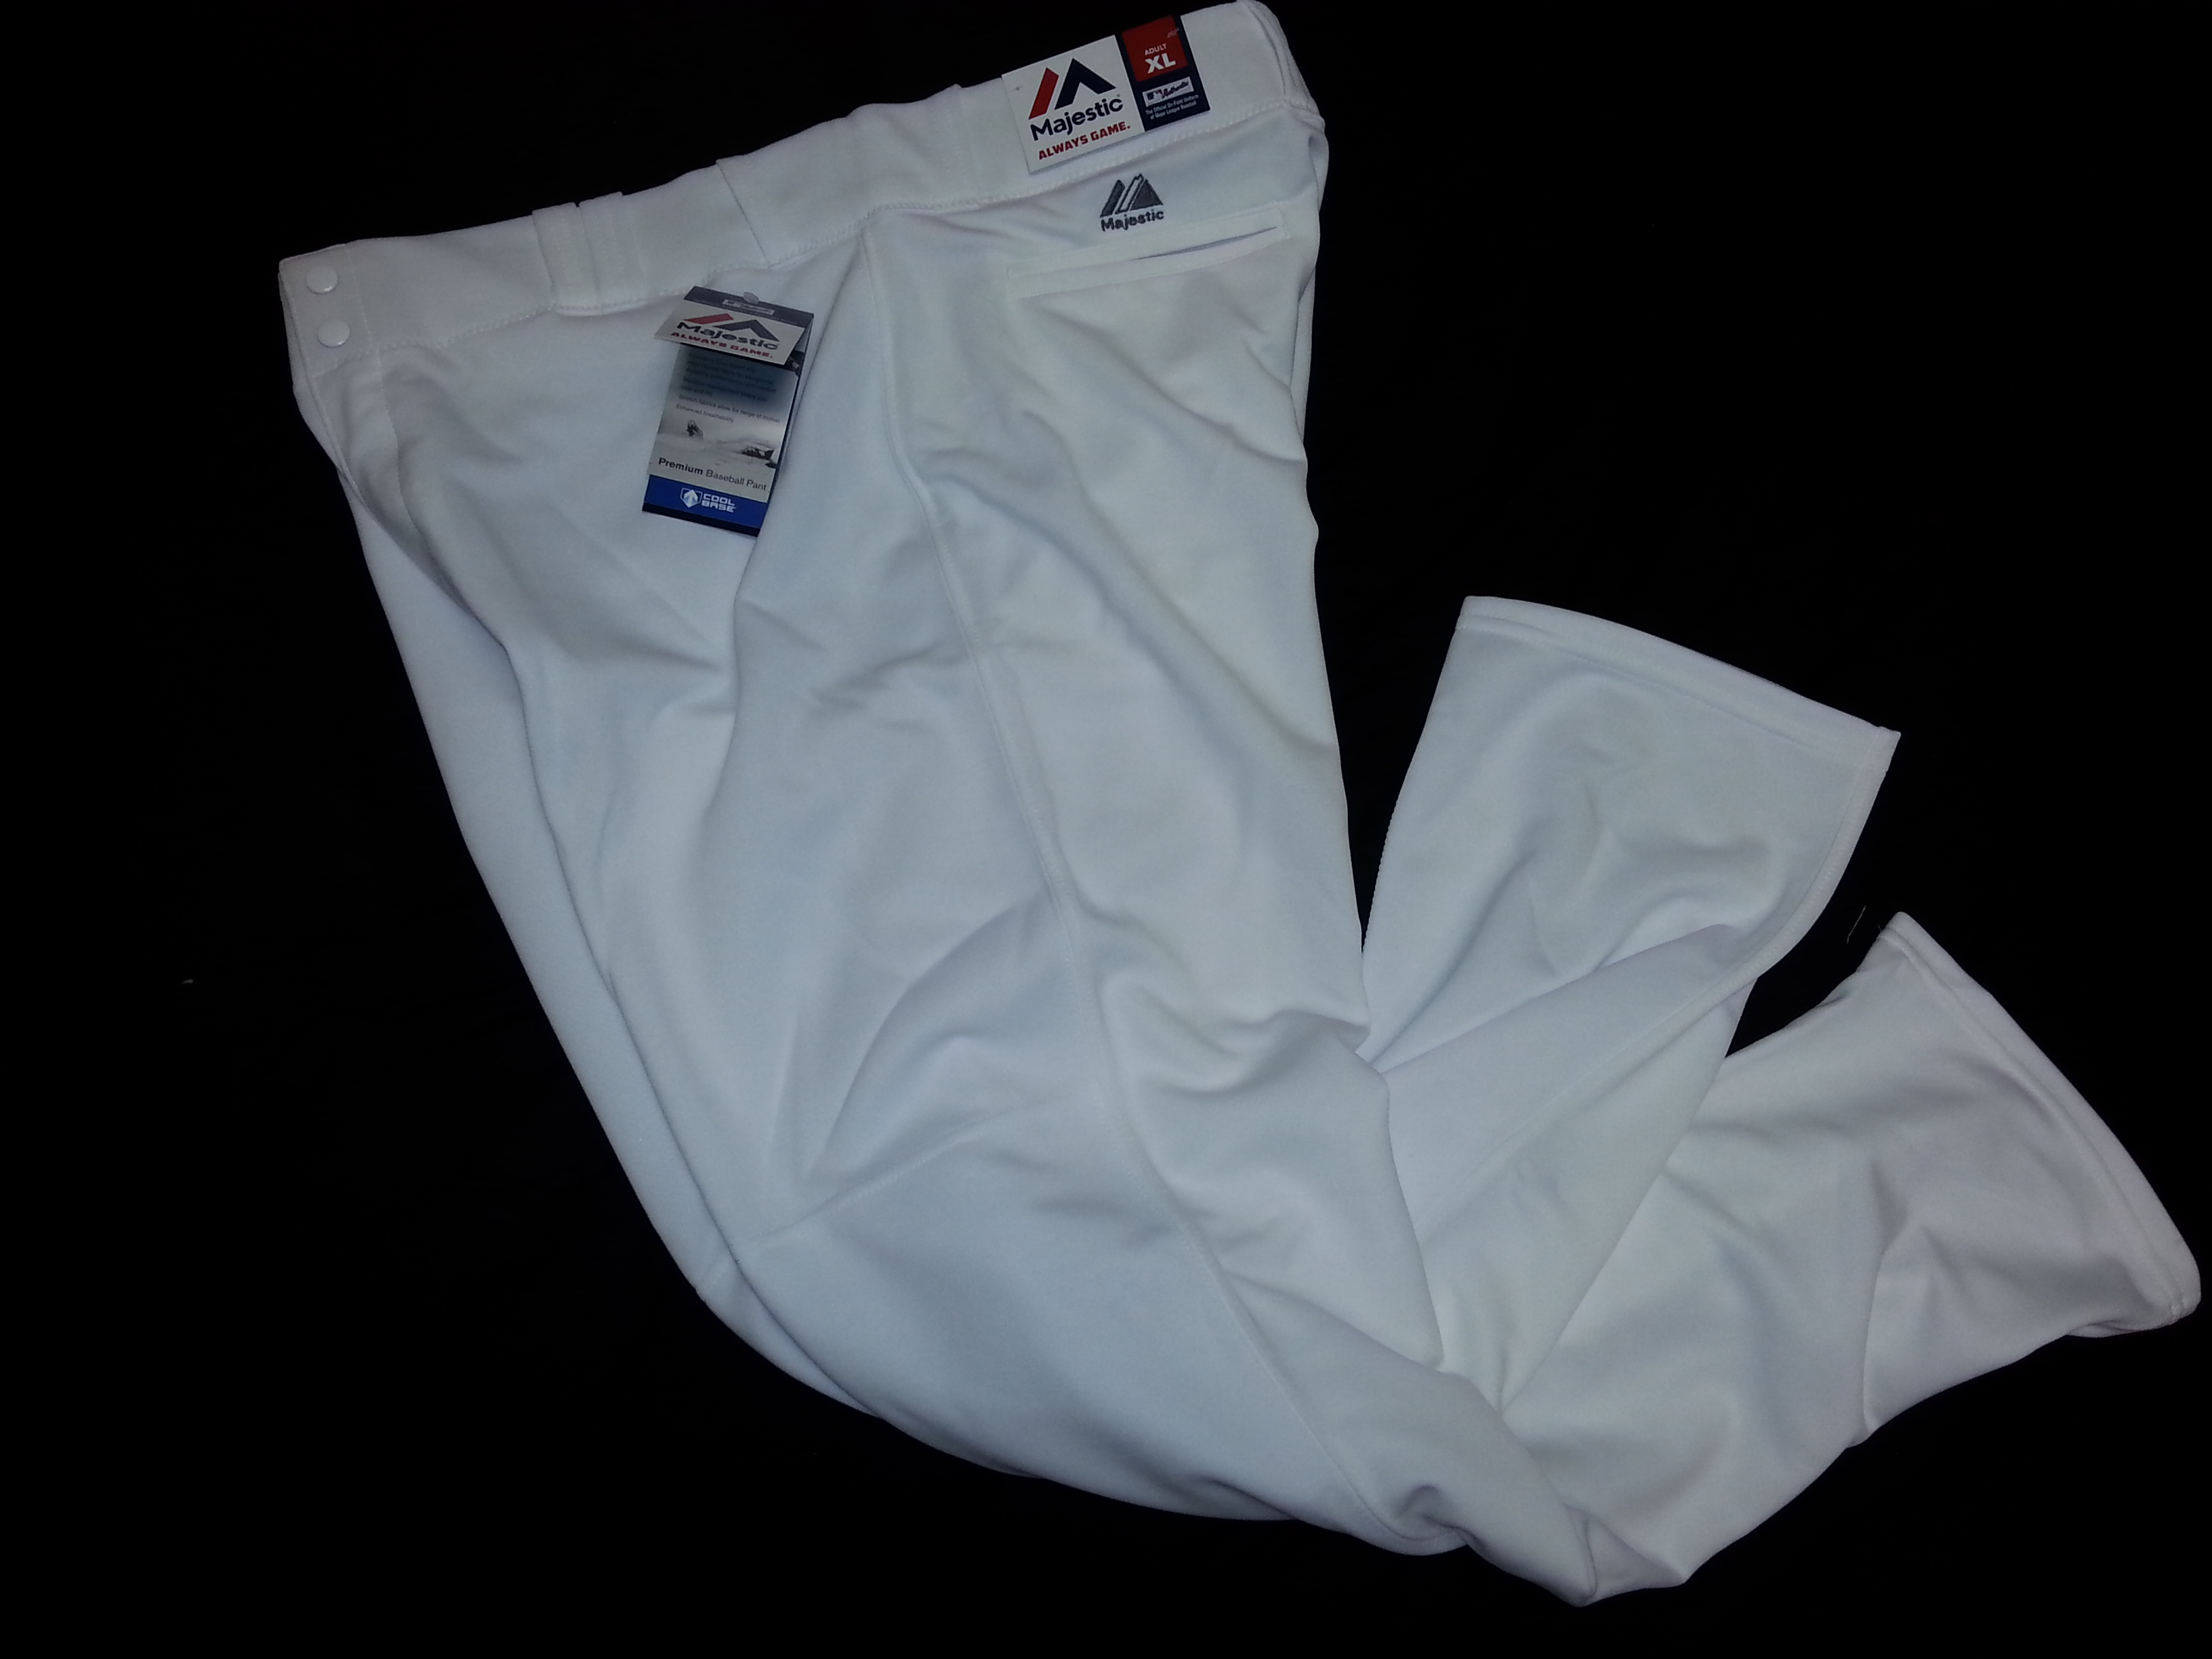 Details about   Majestic Cool Base Sliding Short Adult Small and XL 